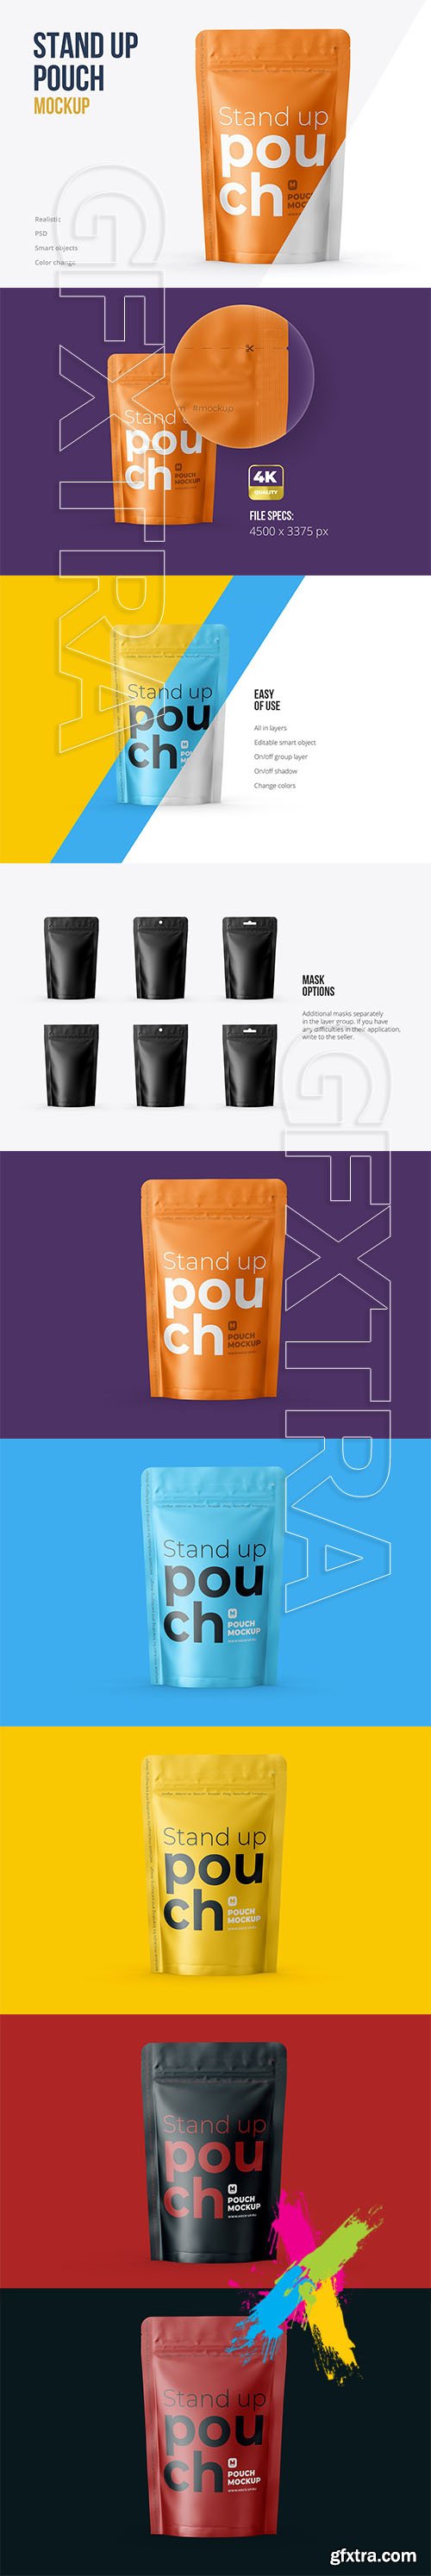 CreativeMarket - Stand Up Pouch Mockup Front view 5133210